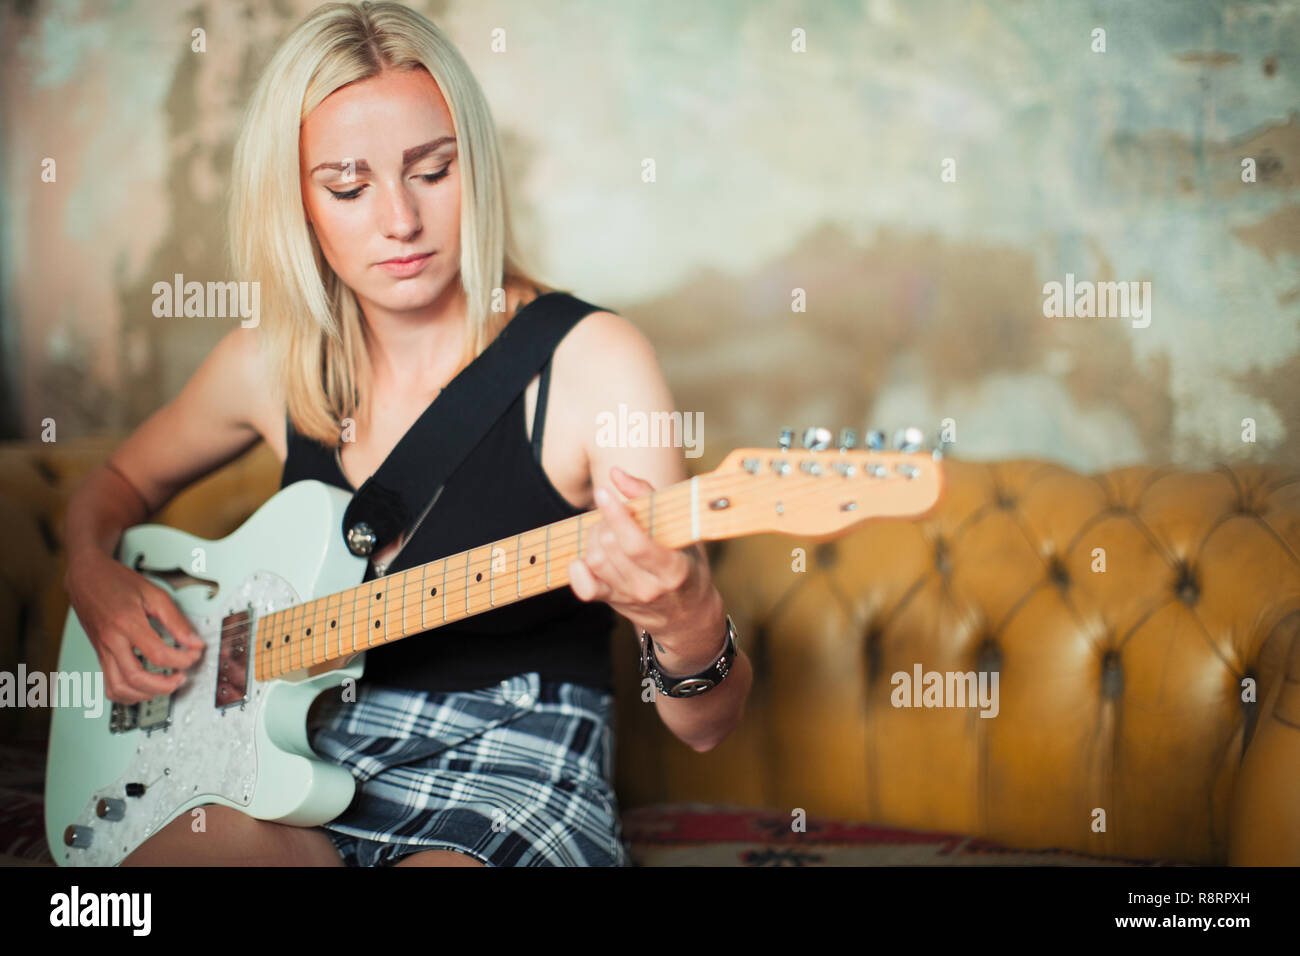 Young woman playing electric guitar on sofa Banque D'Images